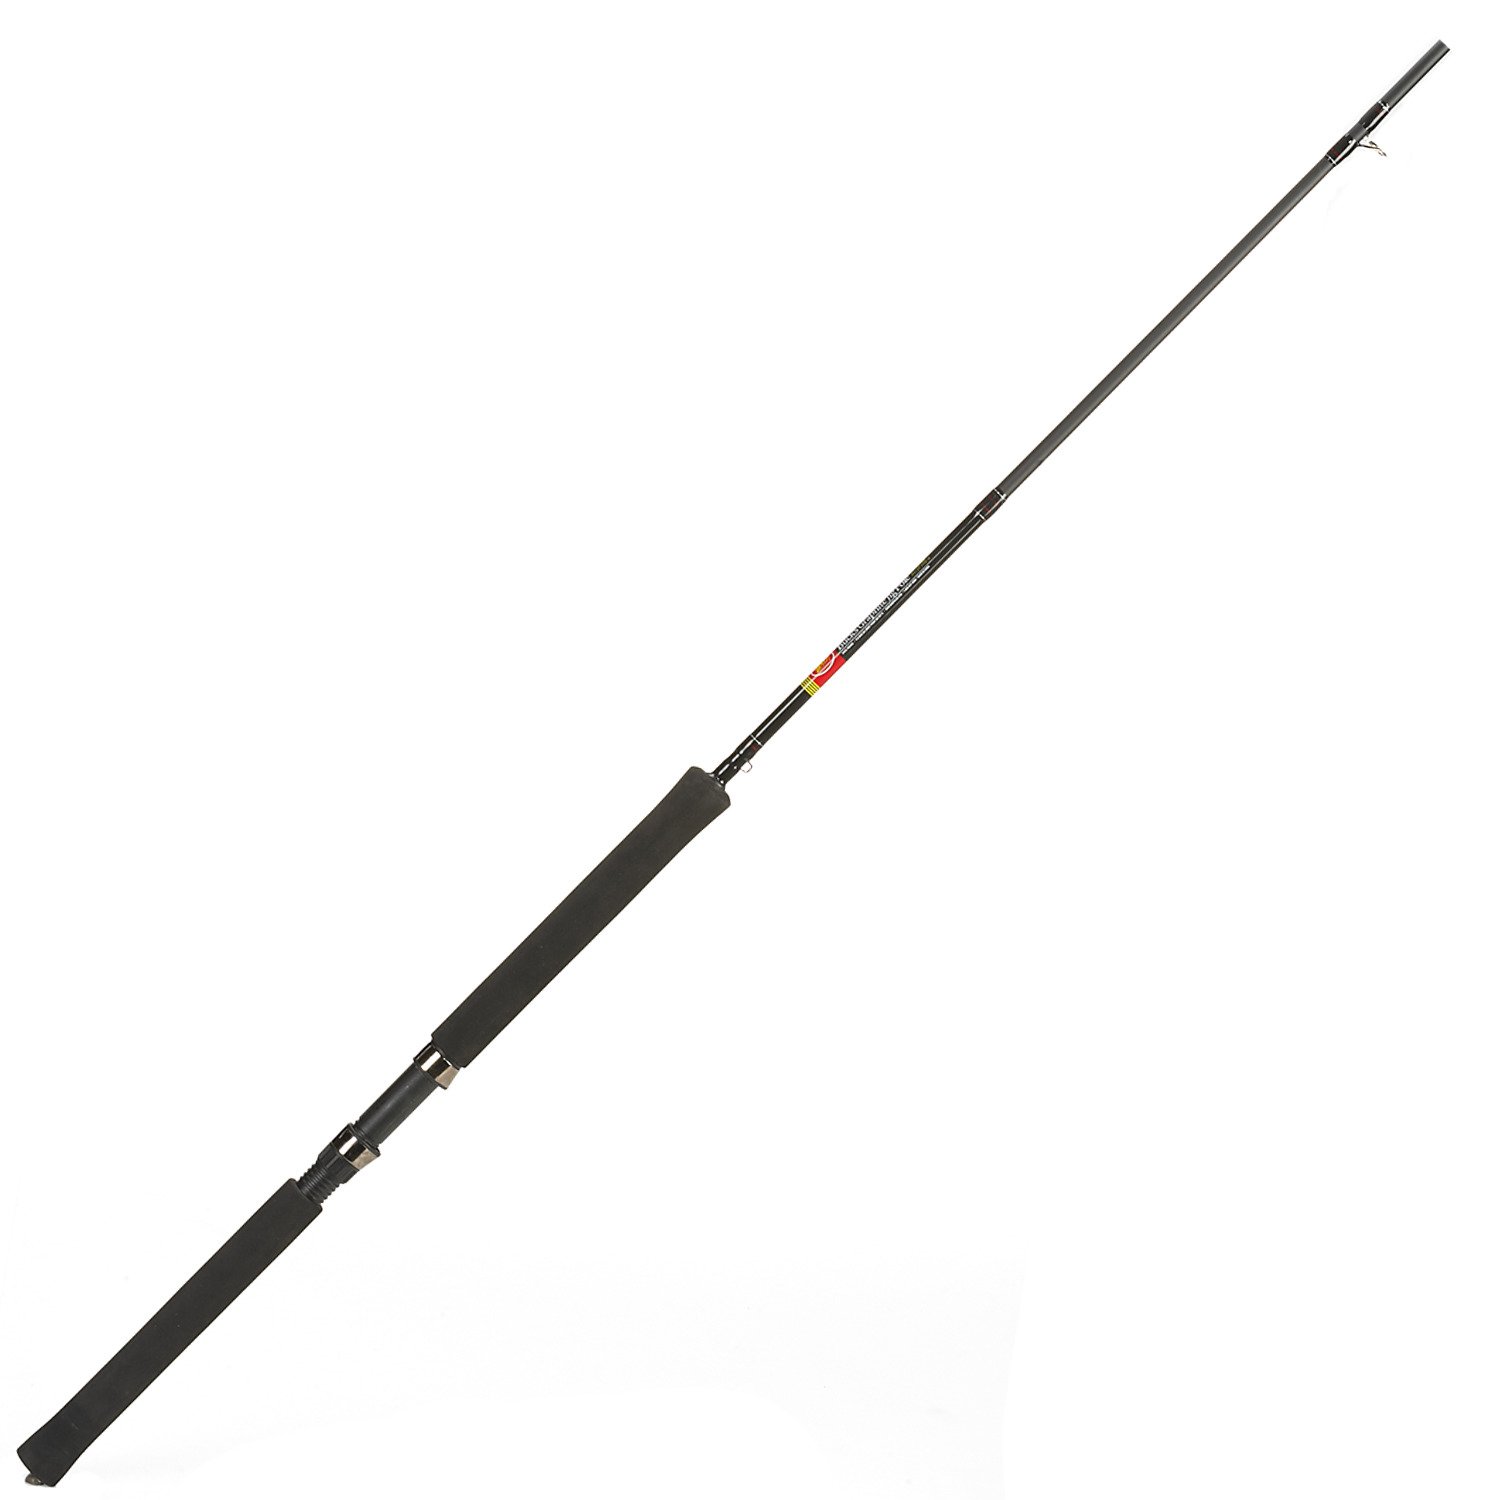 Academy Sports + Outdoors B 'n' M Buck's 10' Freshwater Graphite